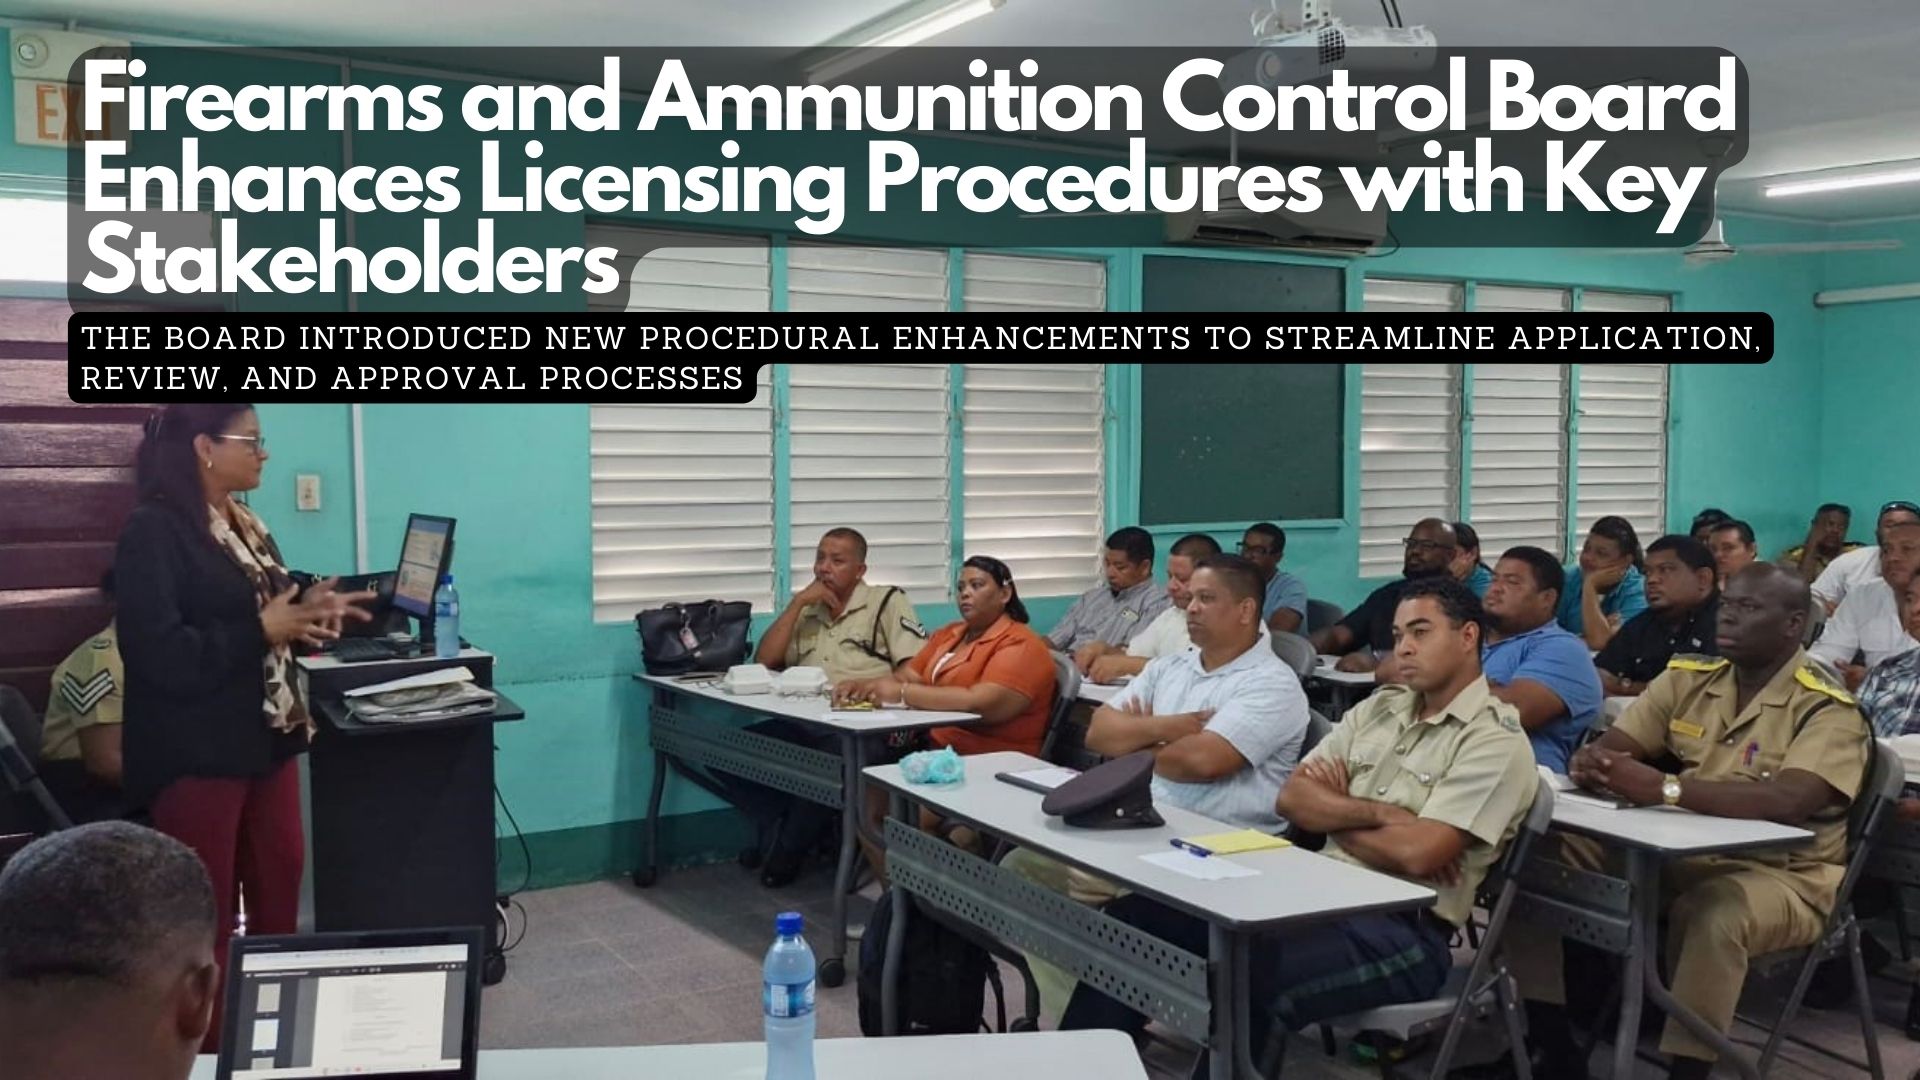 Firearms and Ammunition Control Board Enhances Licensing Procedures with Key Stakeholders